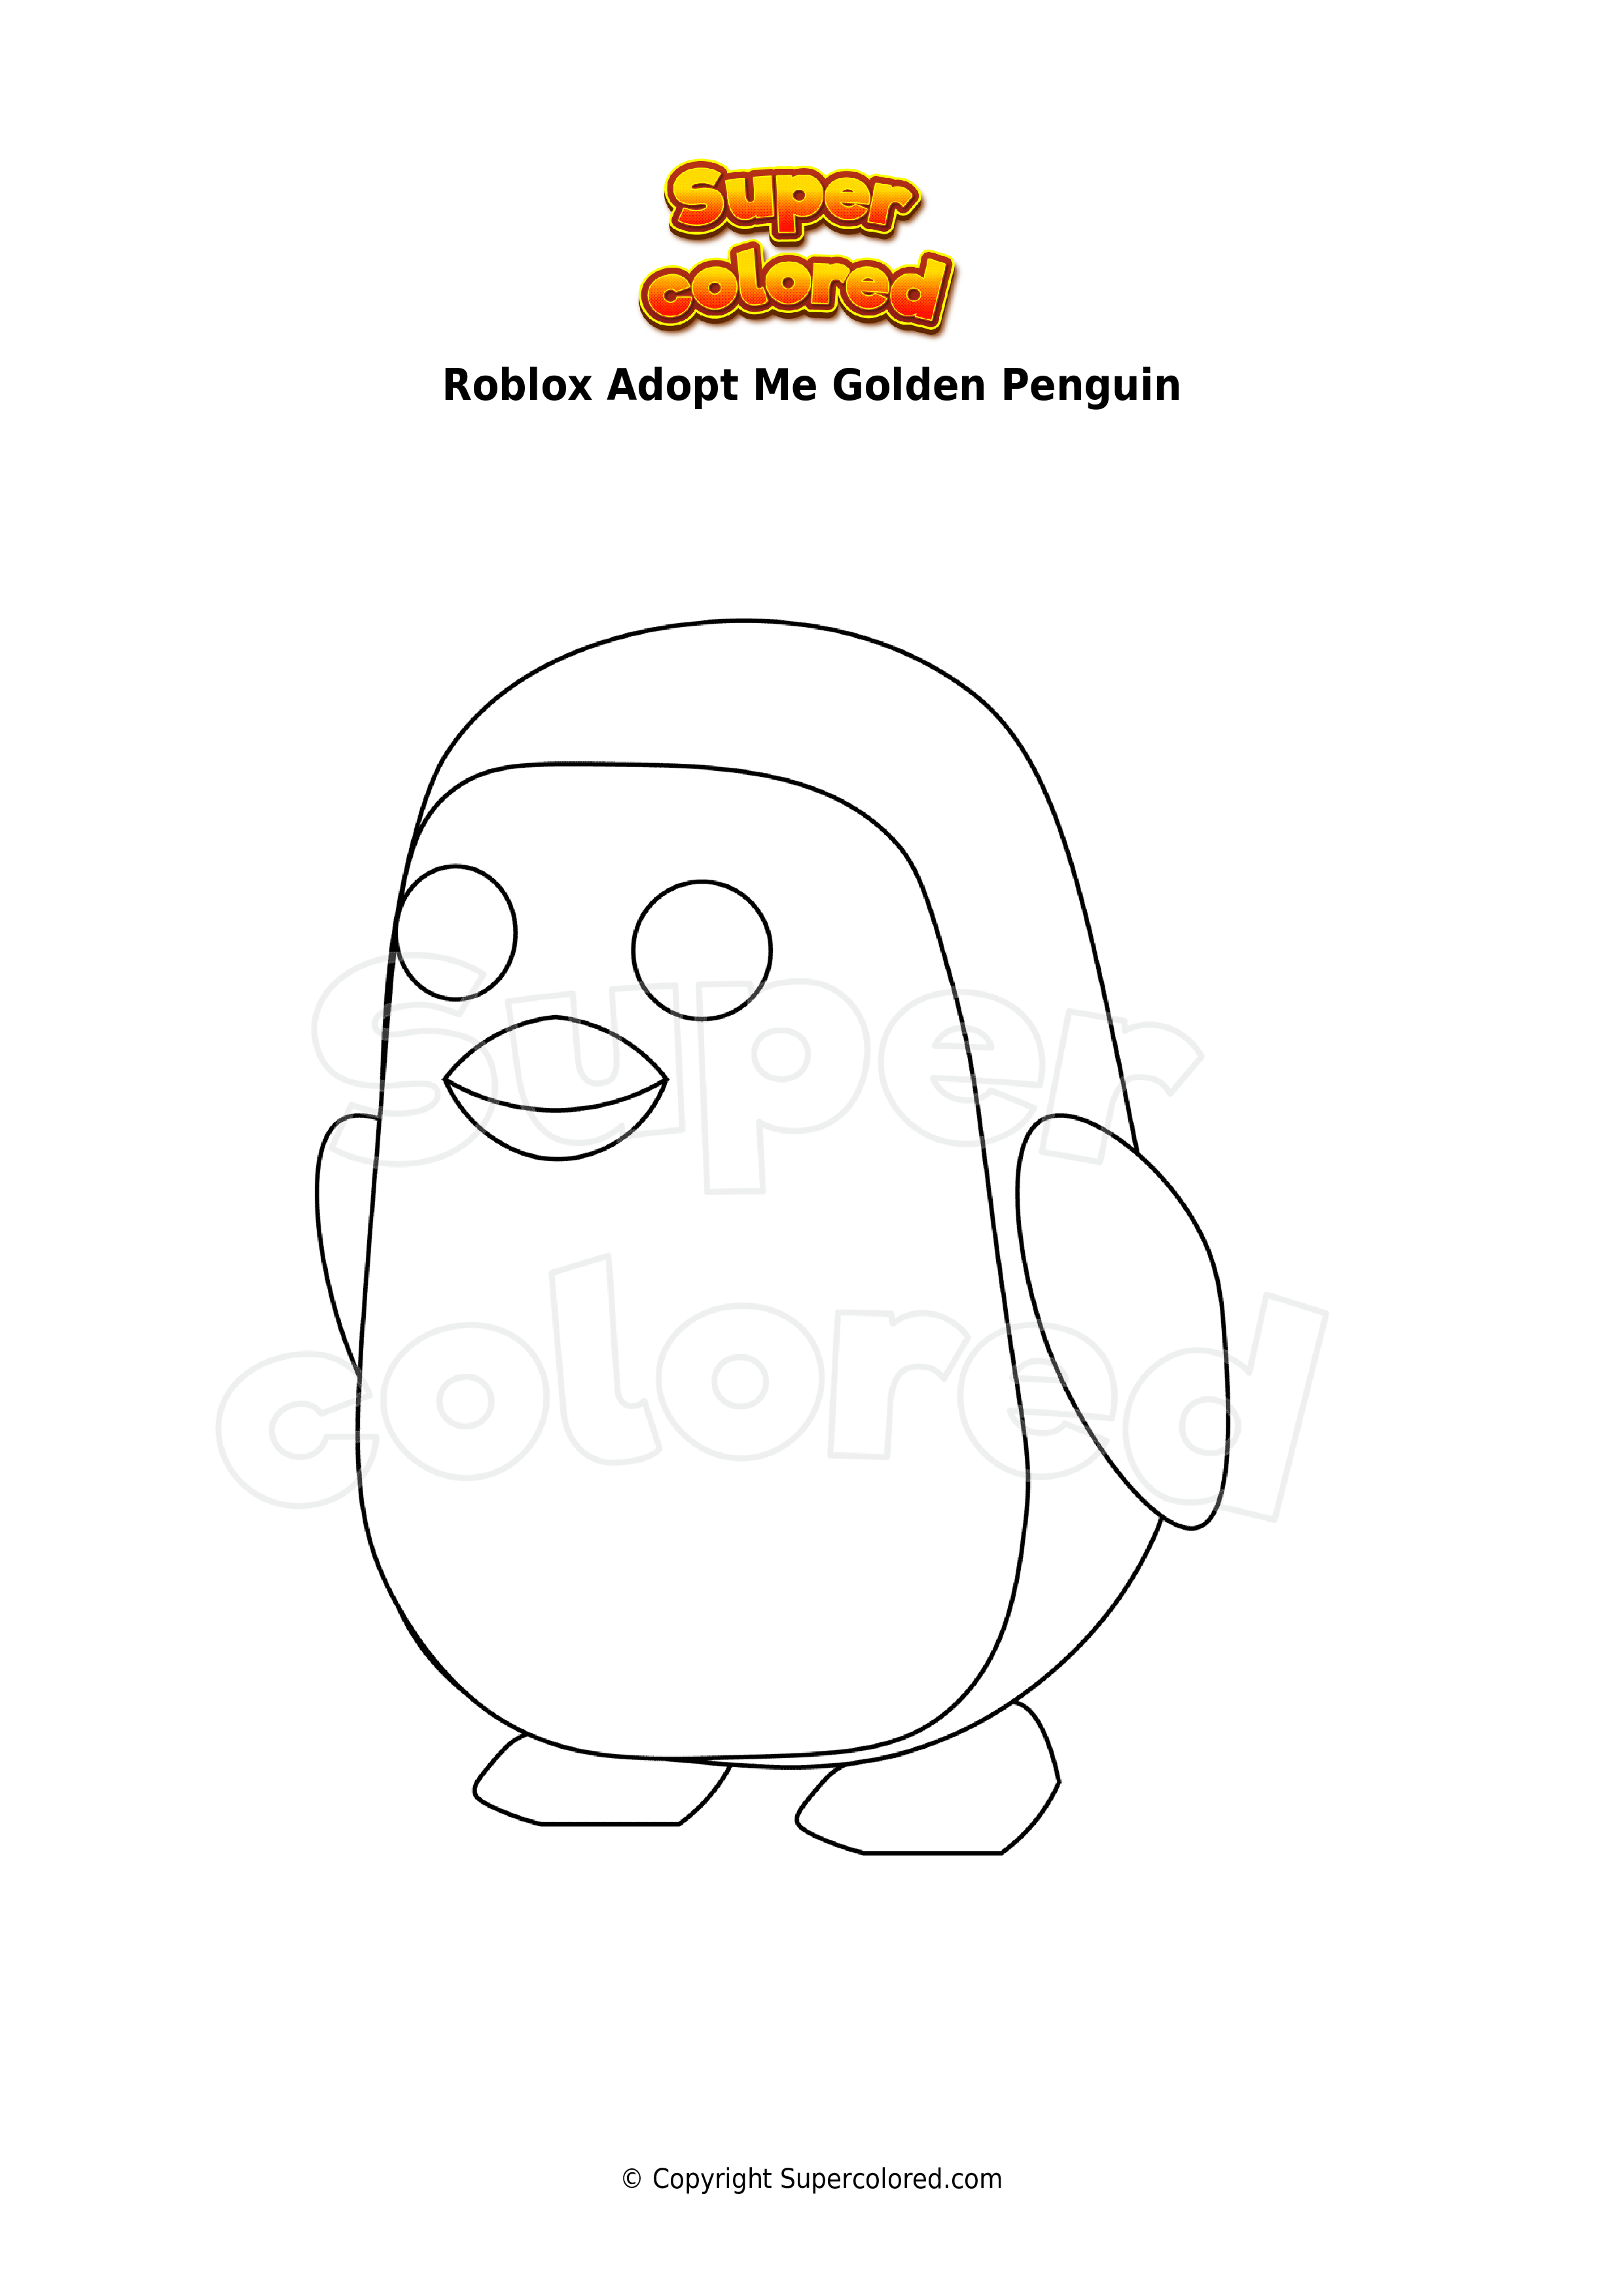 Coloring Pages   Roblox Adopt Me   Supercolored